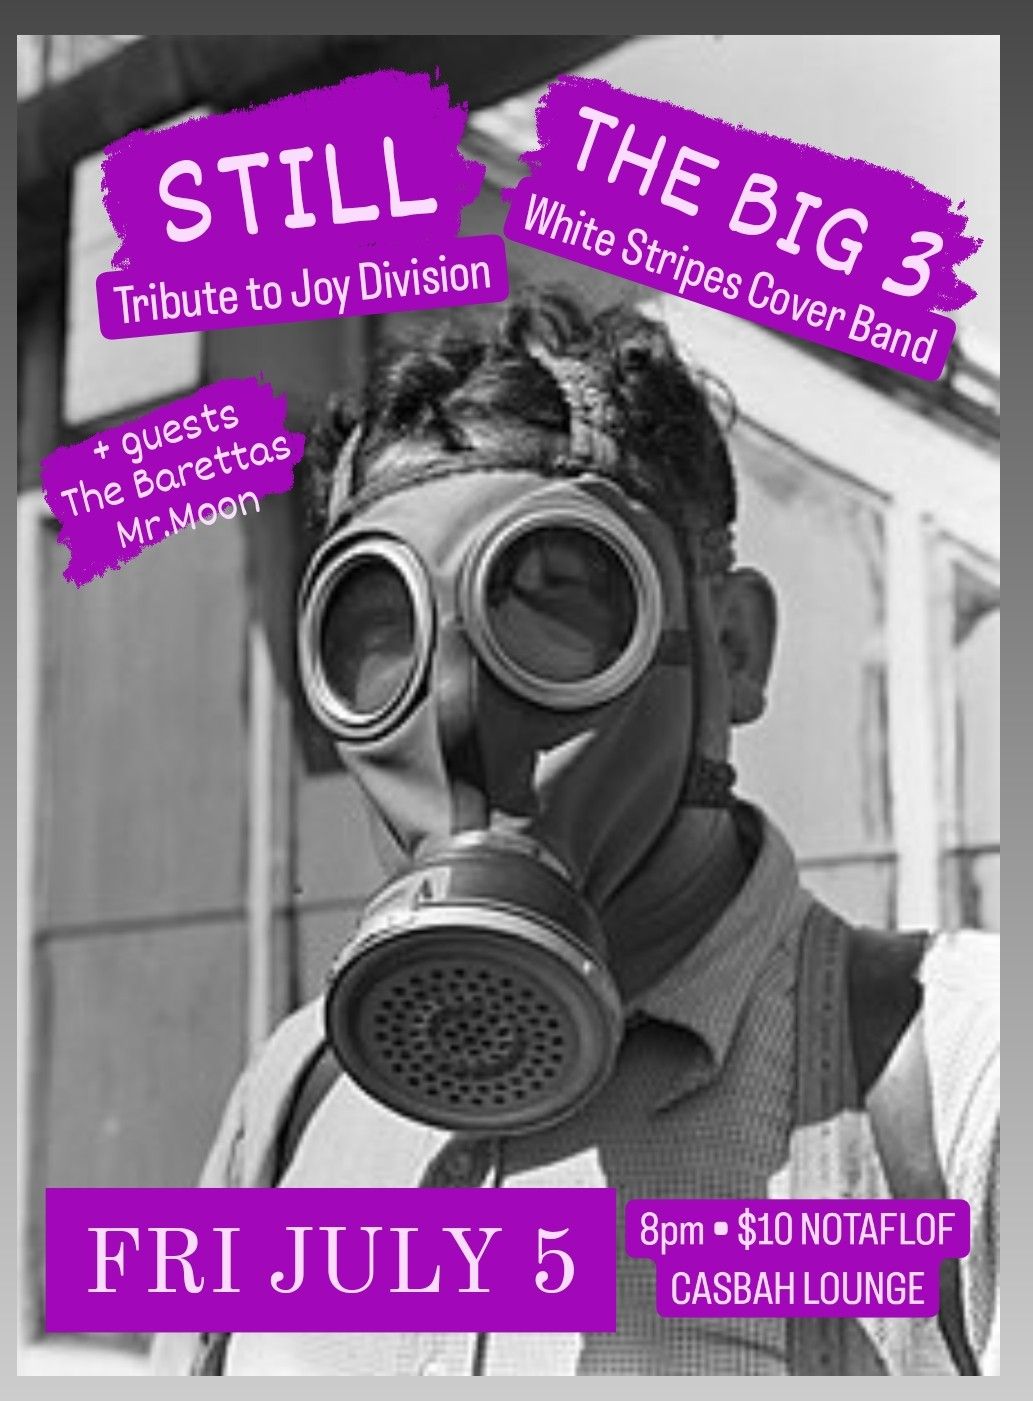 STILL (Joy Division Tribute), THE BIG3 (White Stripes Covers), The Barettas : JULY 5 in our LOUNGE